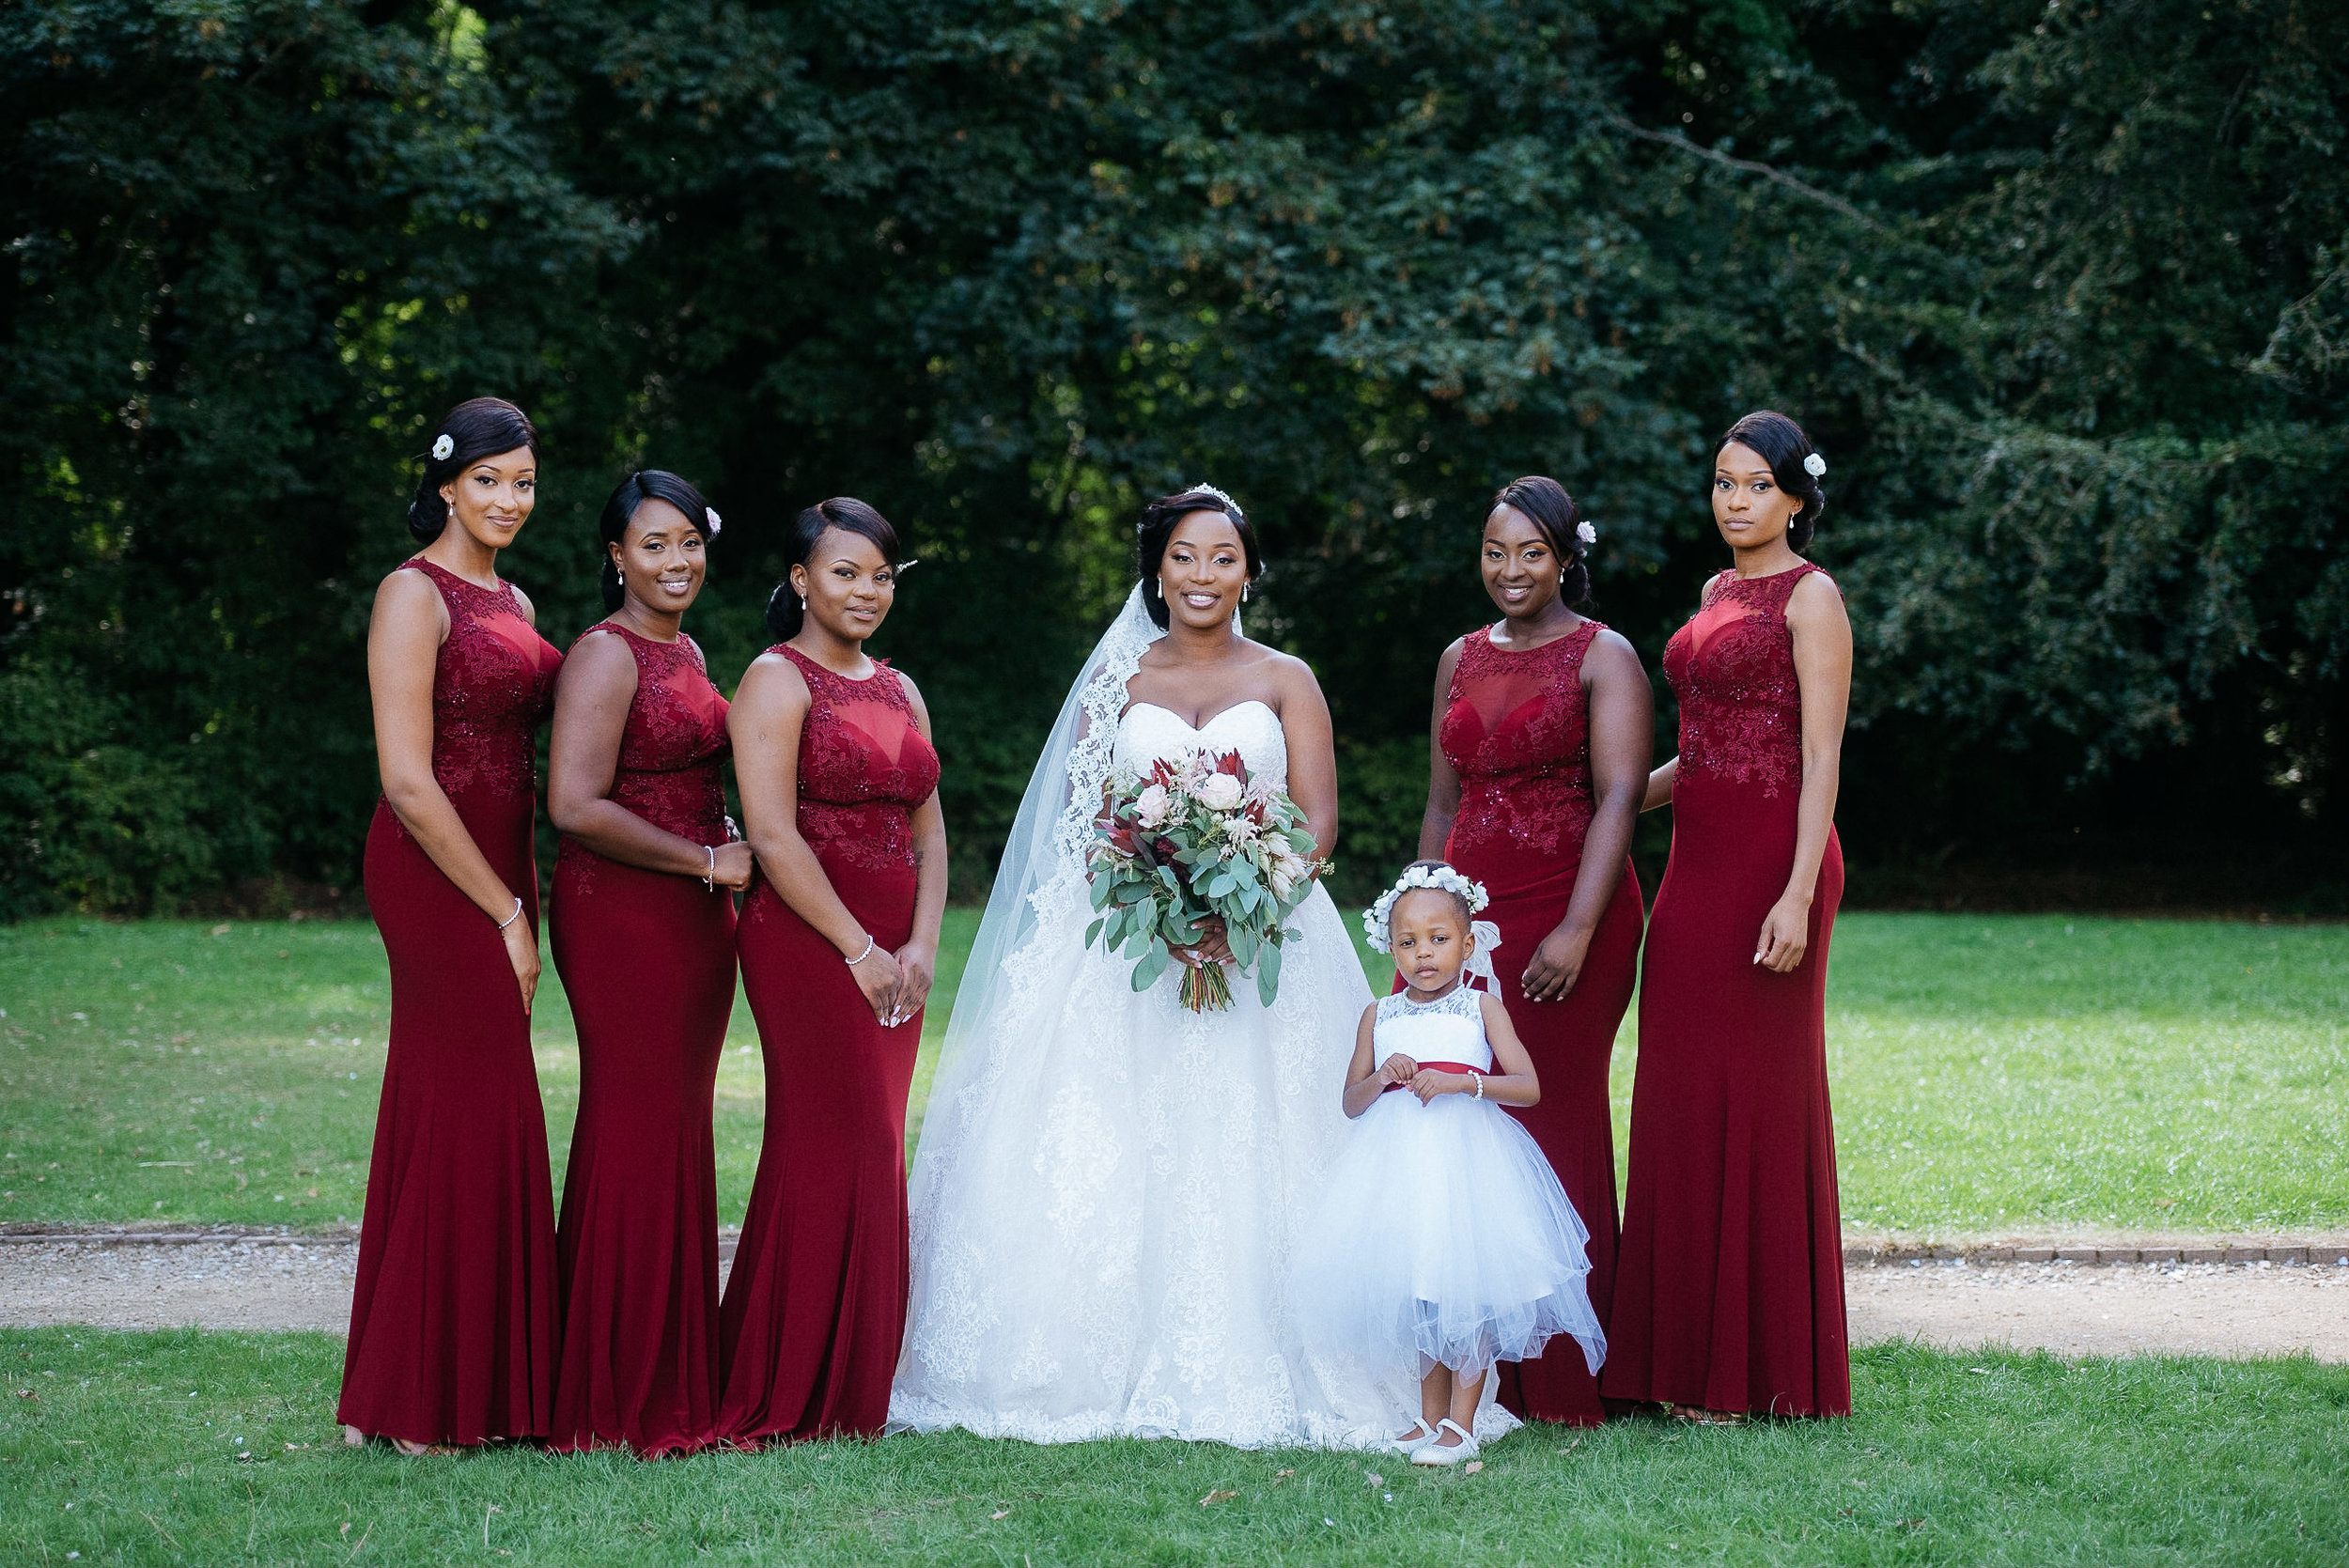 A photograph of the bride and her bridesmaids at their Colwick Hall wedding